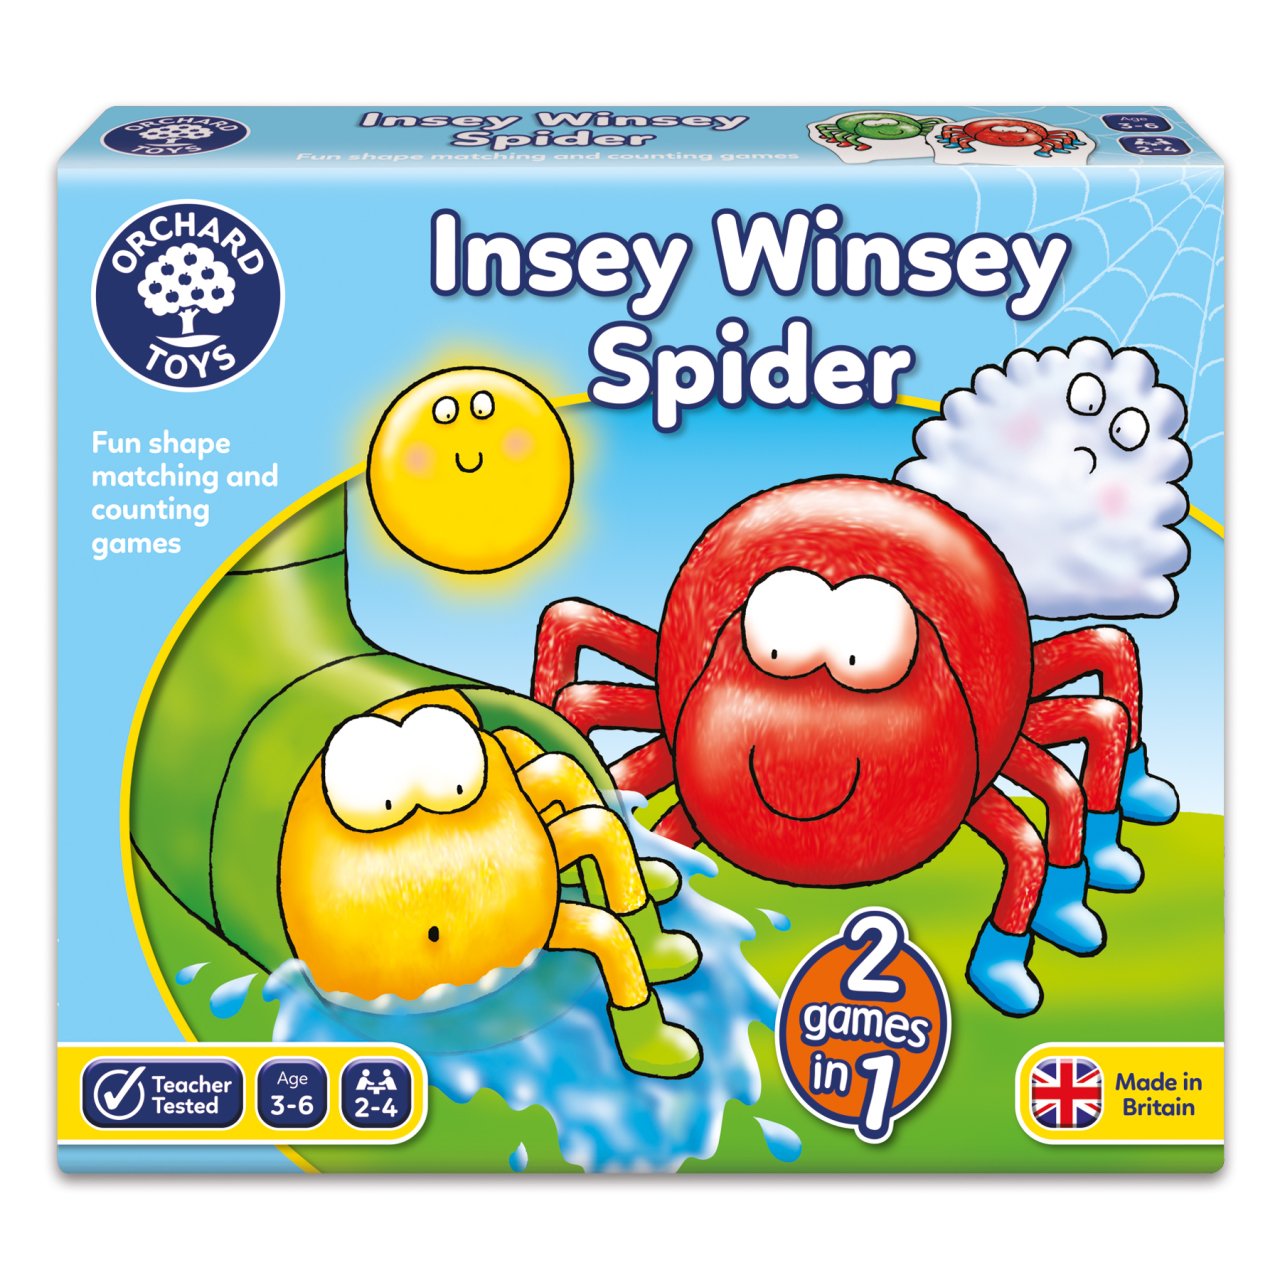  Orchard Toys İnsey Winsey Spider 3-6 Yaş